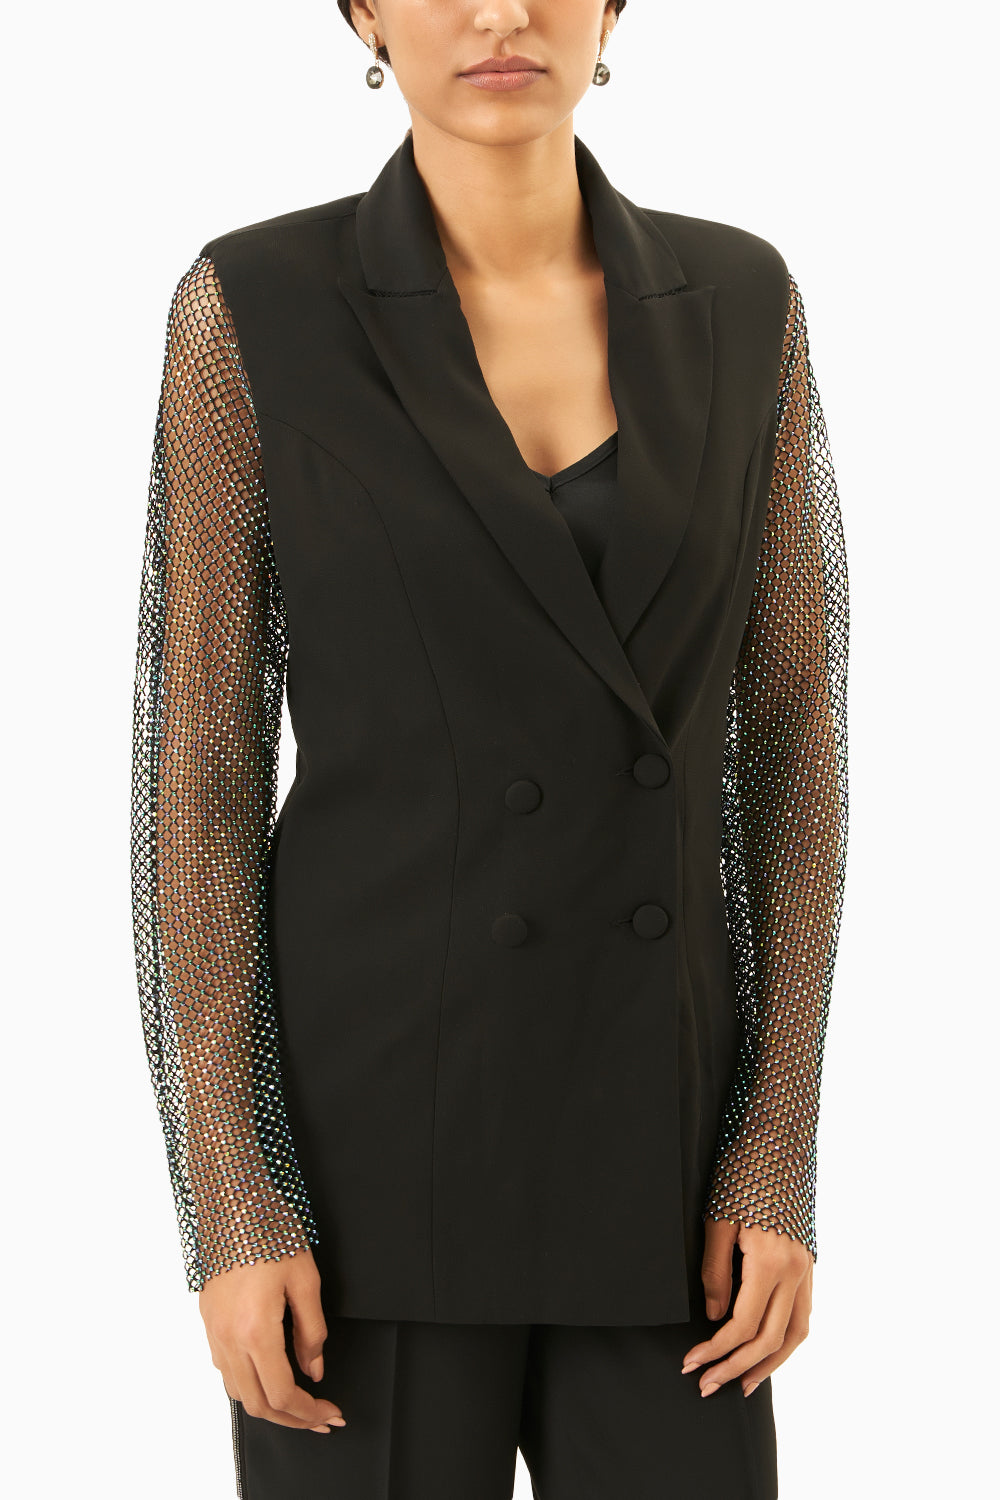 Black Blazer with Crystal mesh lace